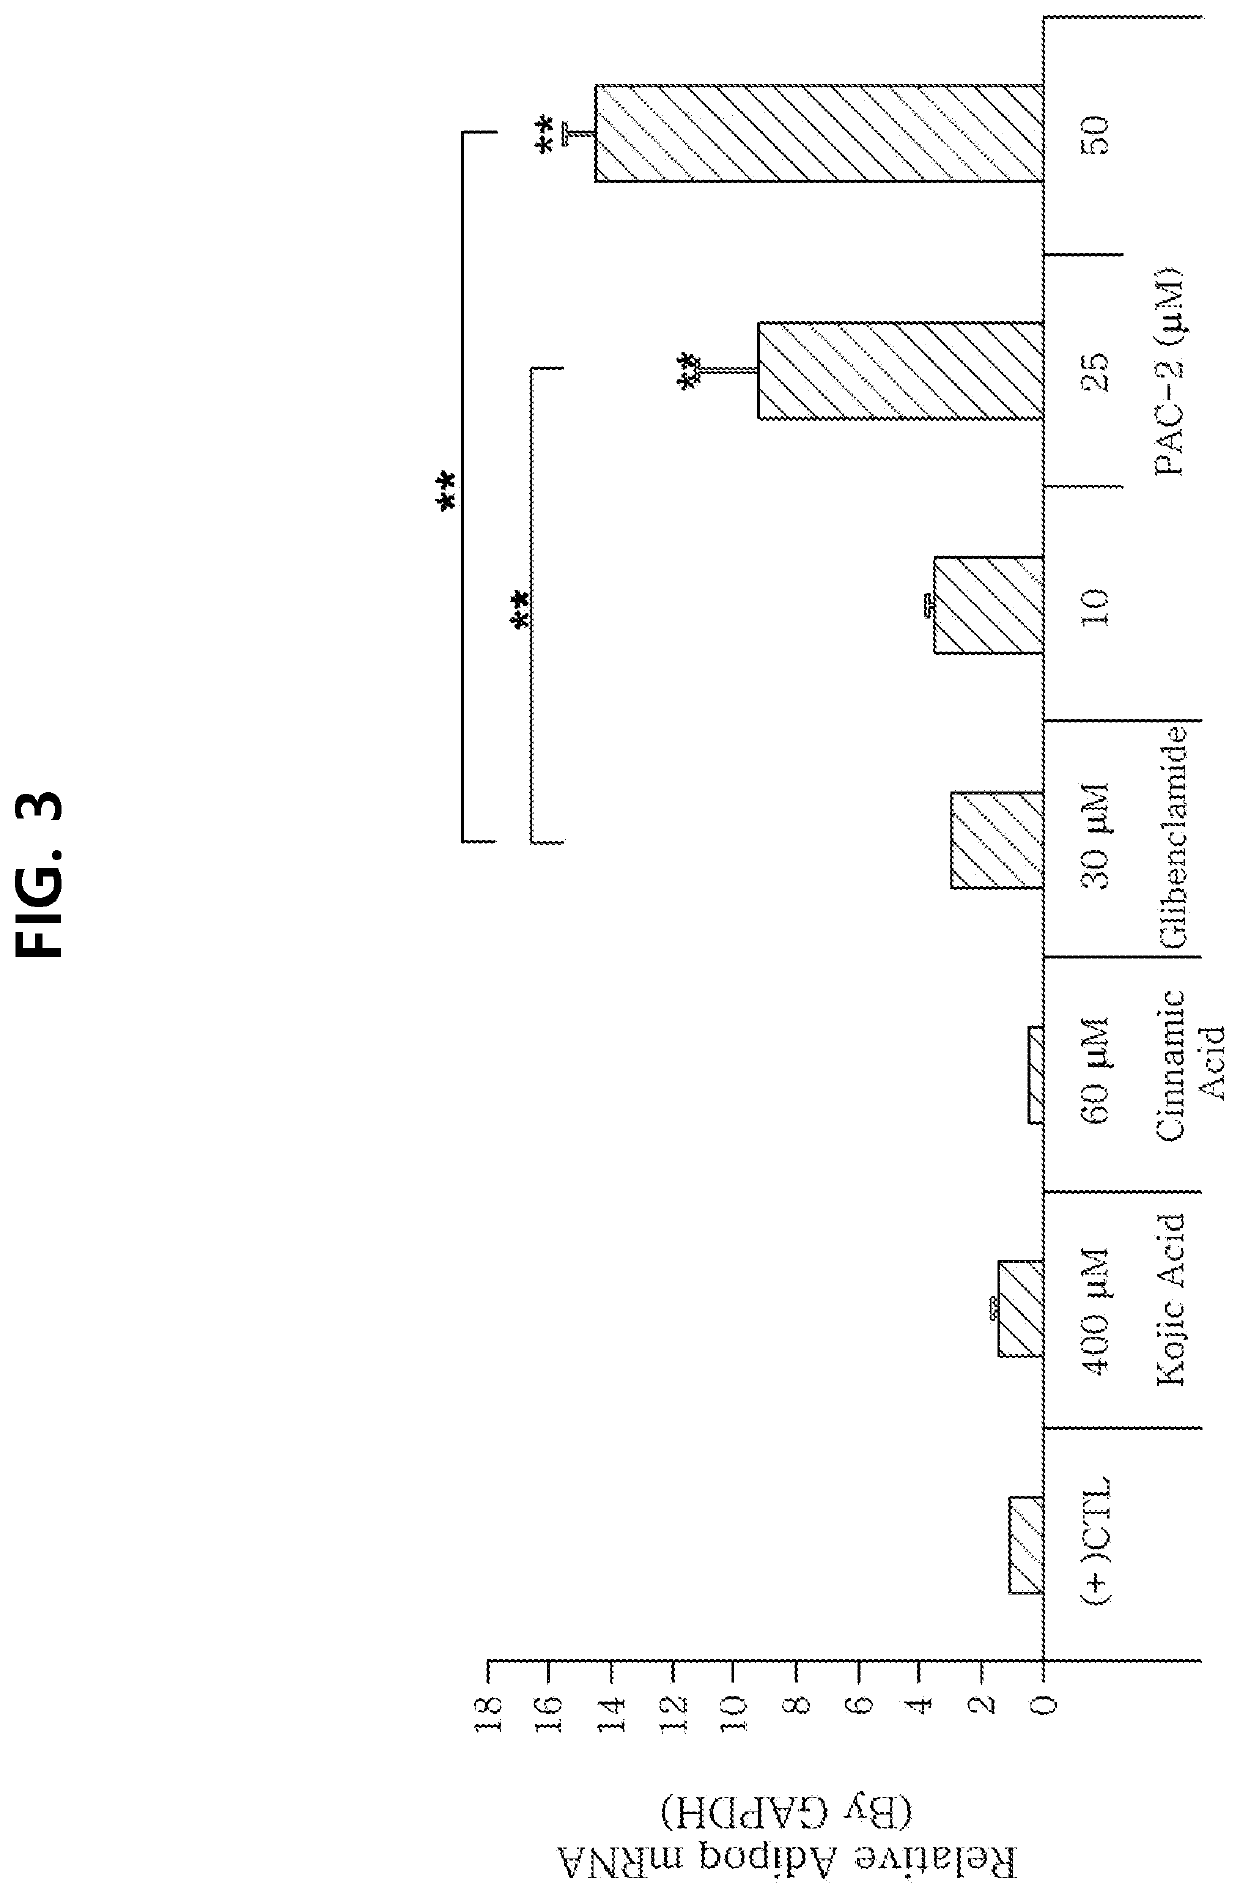 Composition for promoting adipocyte differentiation or adiponectin, comprising trimethoxy phenyl compound